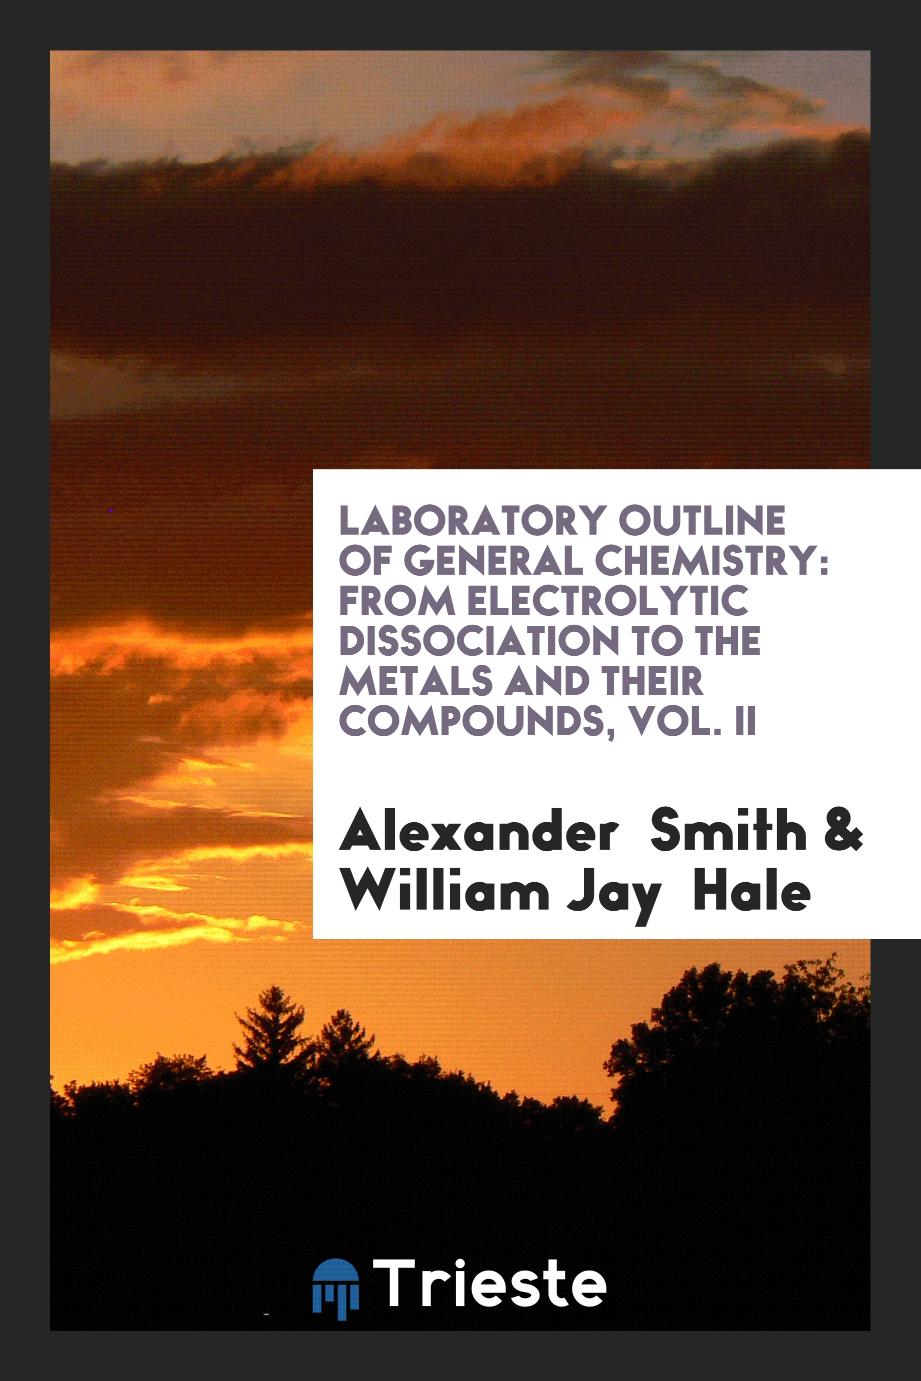 Laboratory Outline of General Chemistry: from electrolytic dissociation to the metals and their compounds, Vol. II